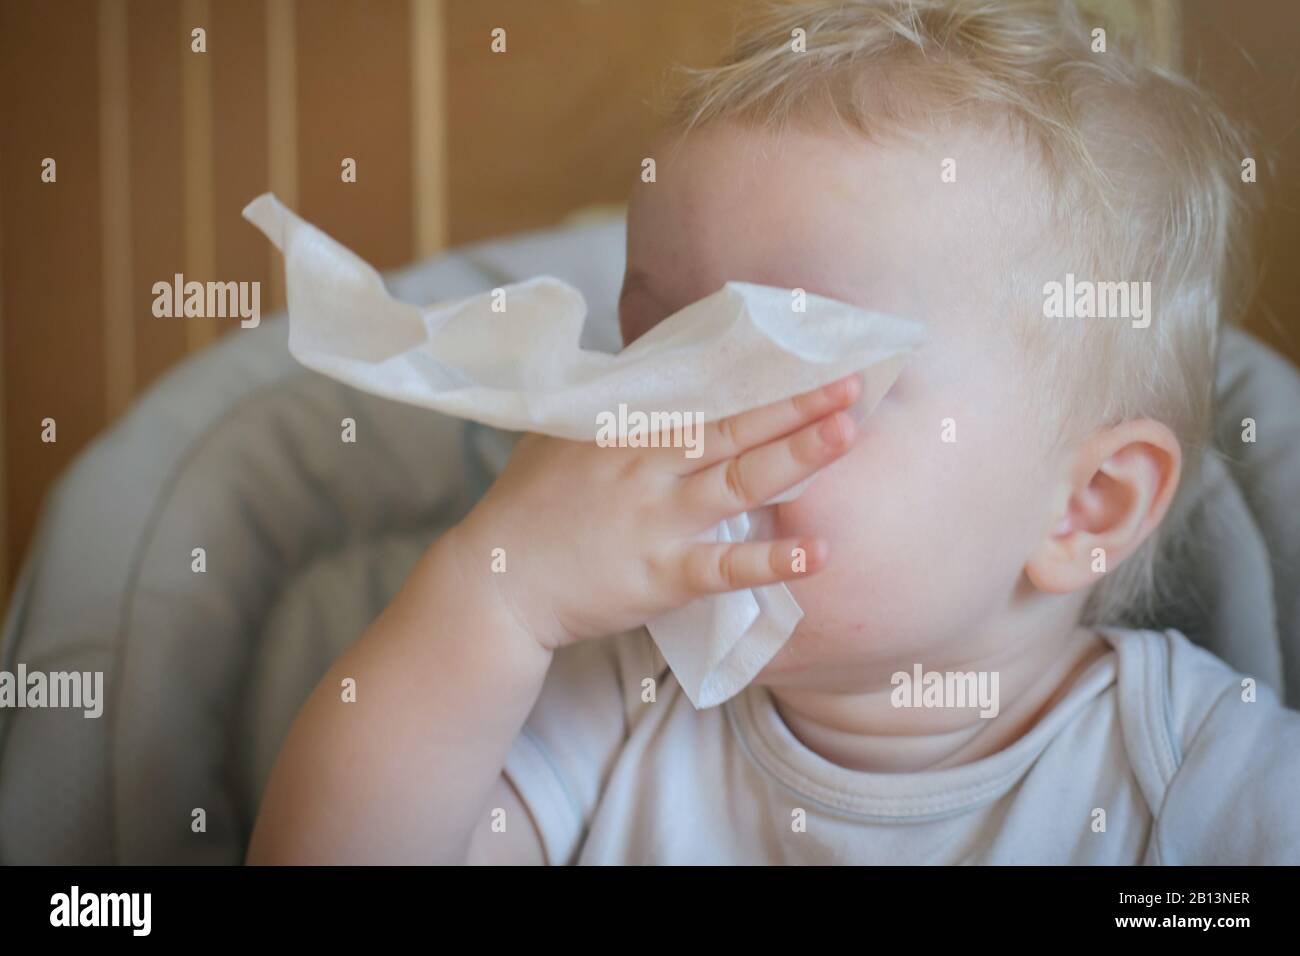 The child wipes his nose with a white handkerchief. A sick child eats sitting on feeding chair. Kid with cold rhinitis. virus and infection. Coronavir Stock Photo